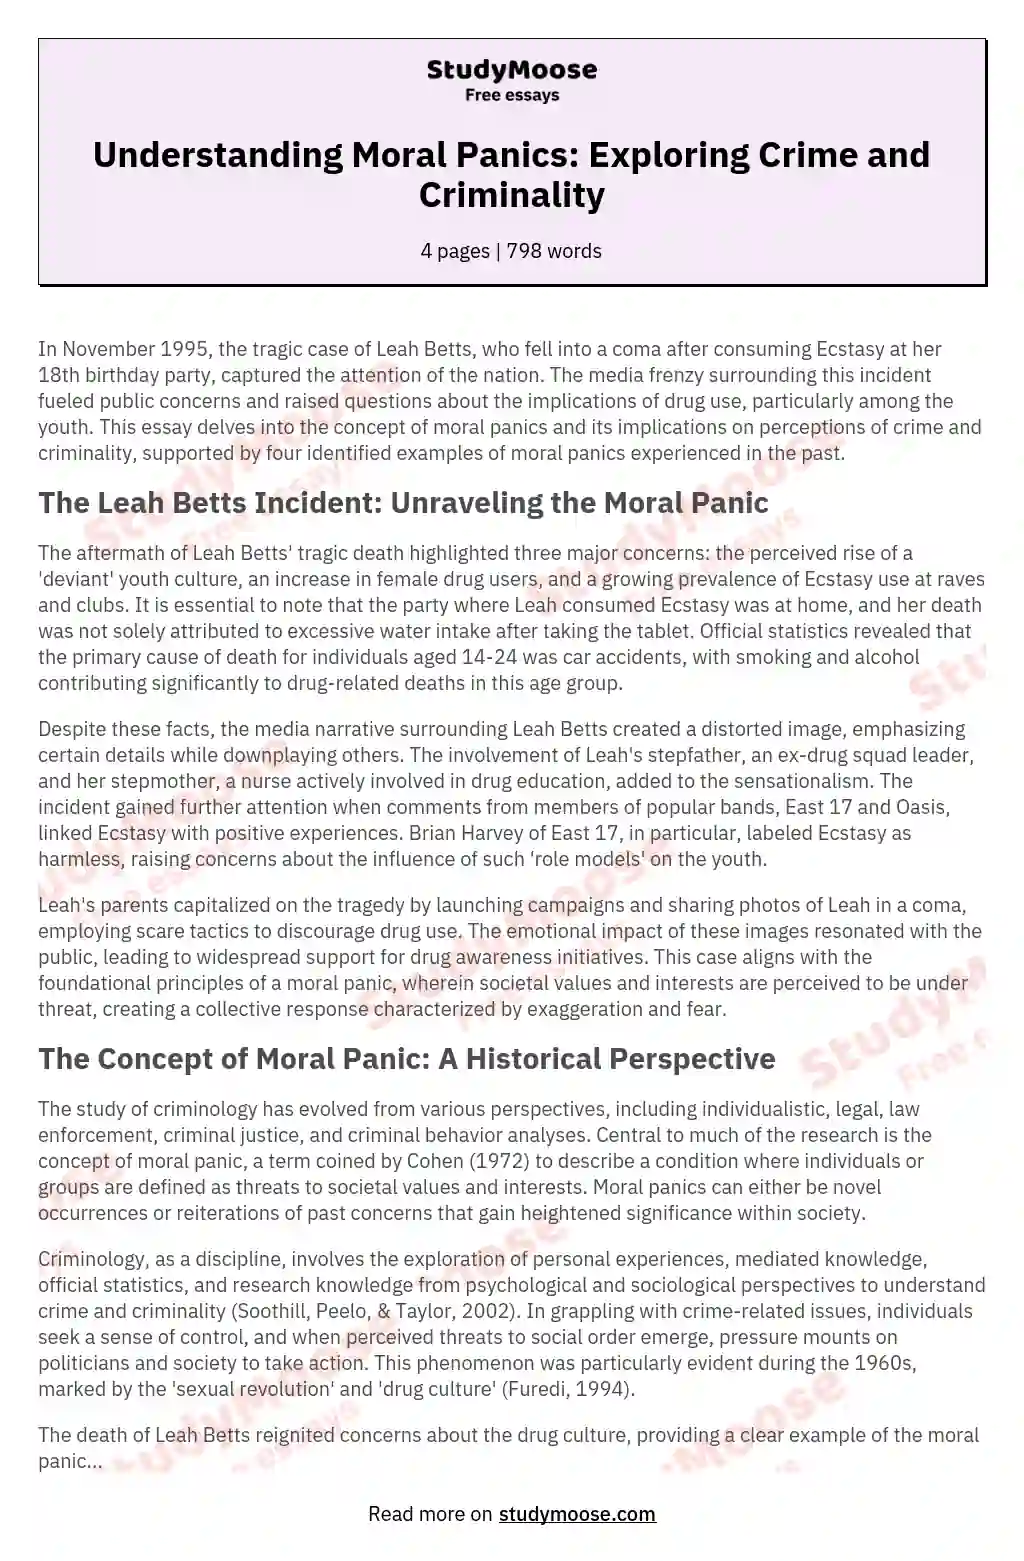 Leah Betts - 'What is Moral Panic'?